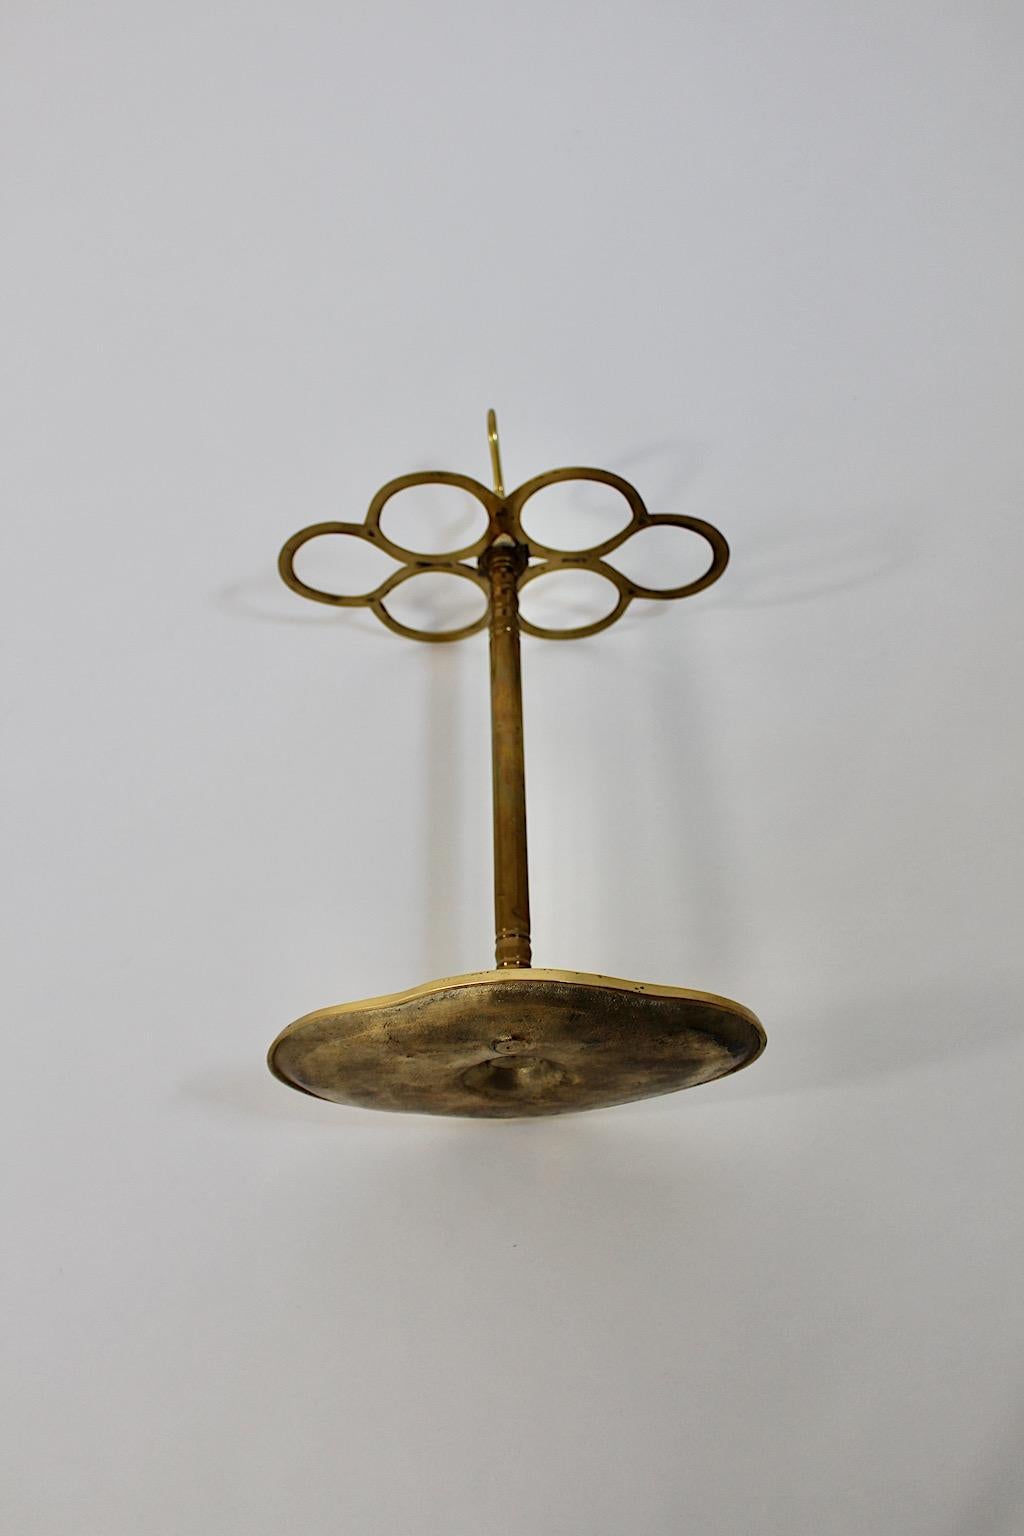 Hollywood Regency Style Vintage Brass Umbrella Stand Cane Holder 1970s Italy For Sale 1